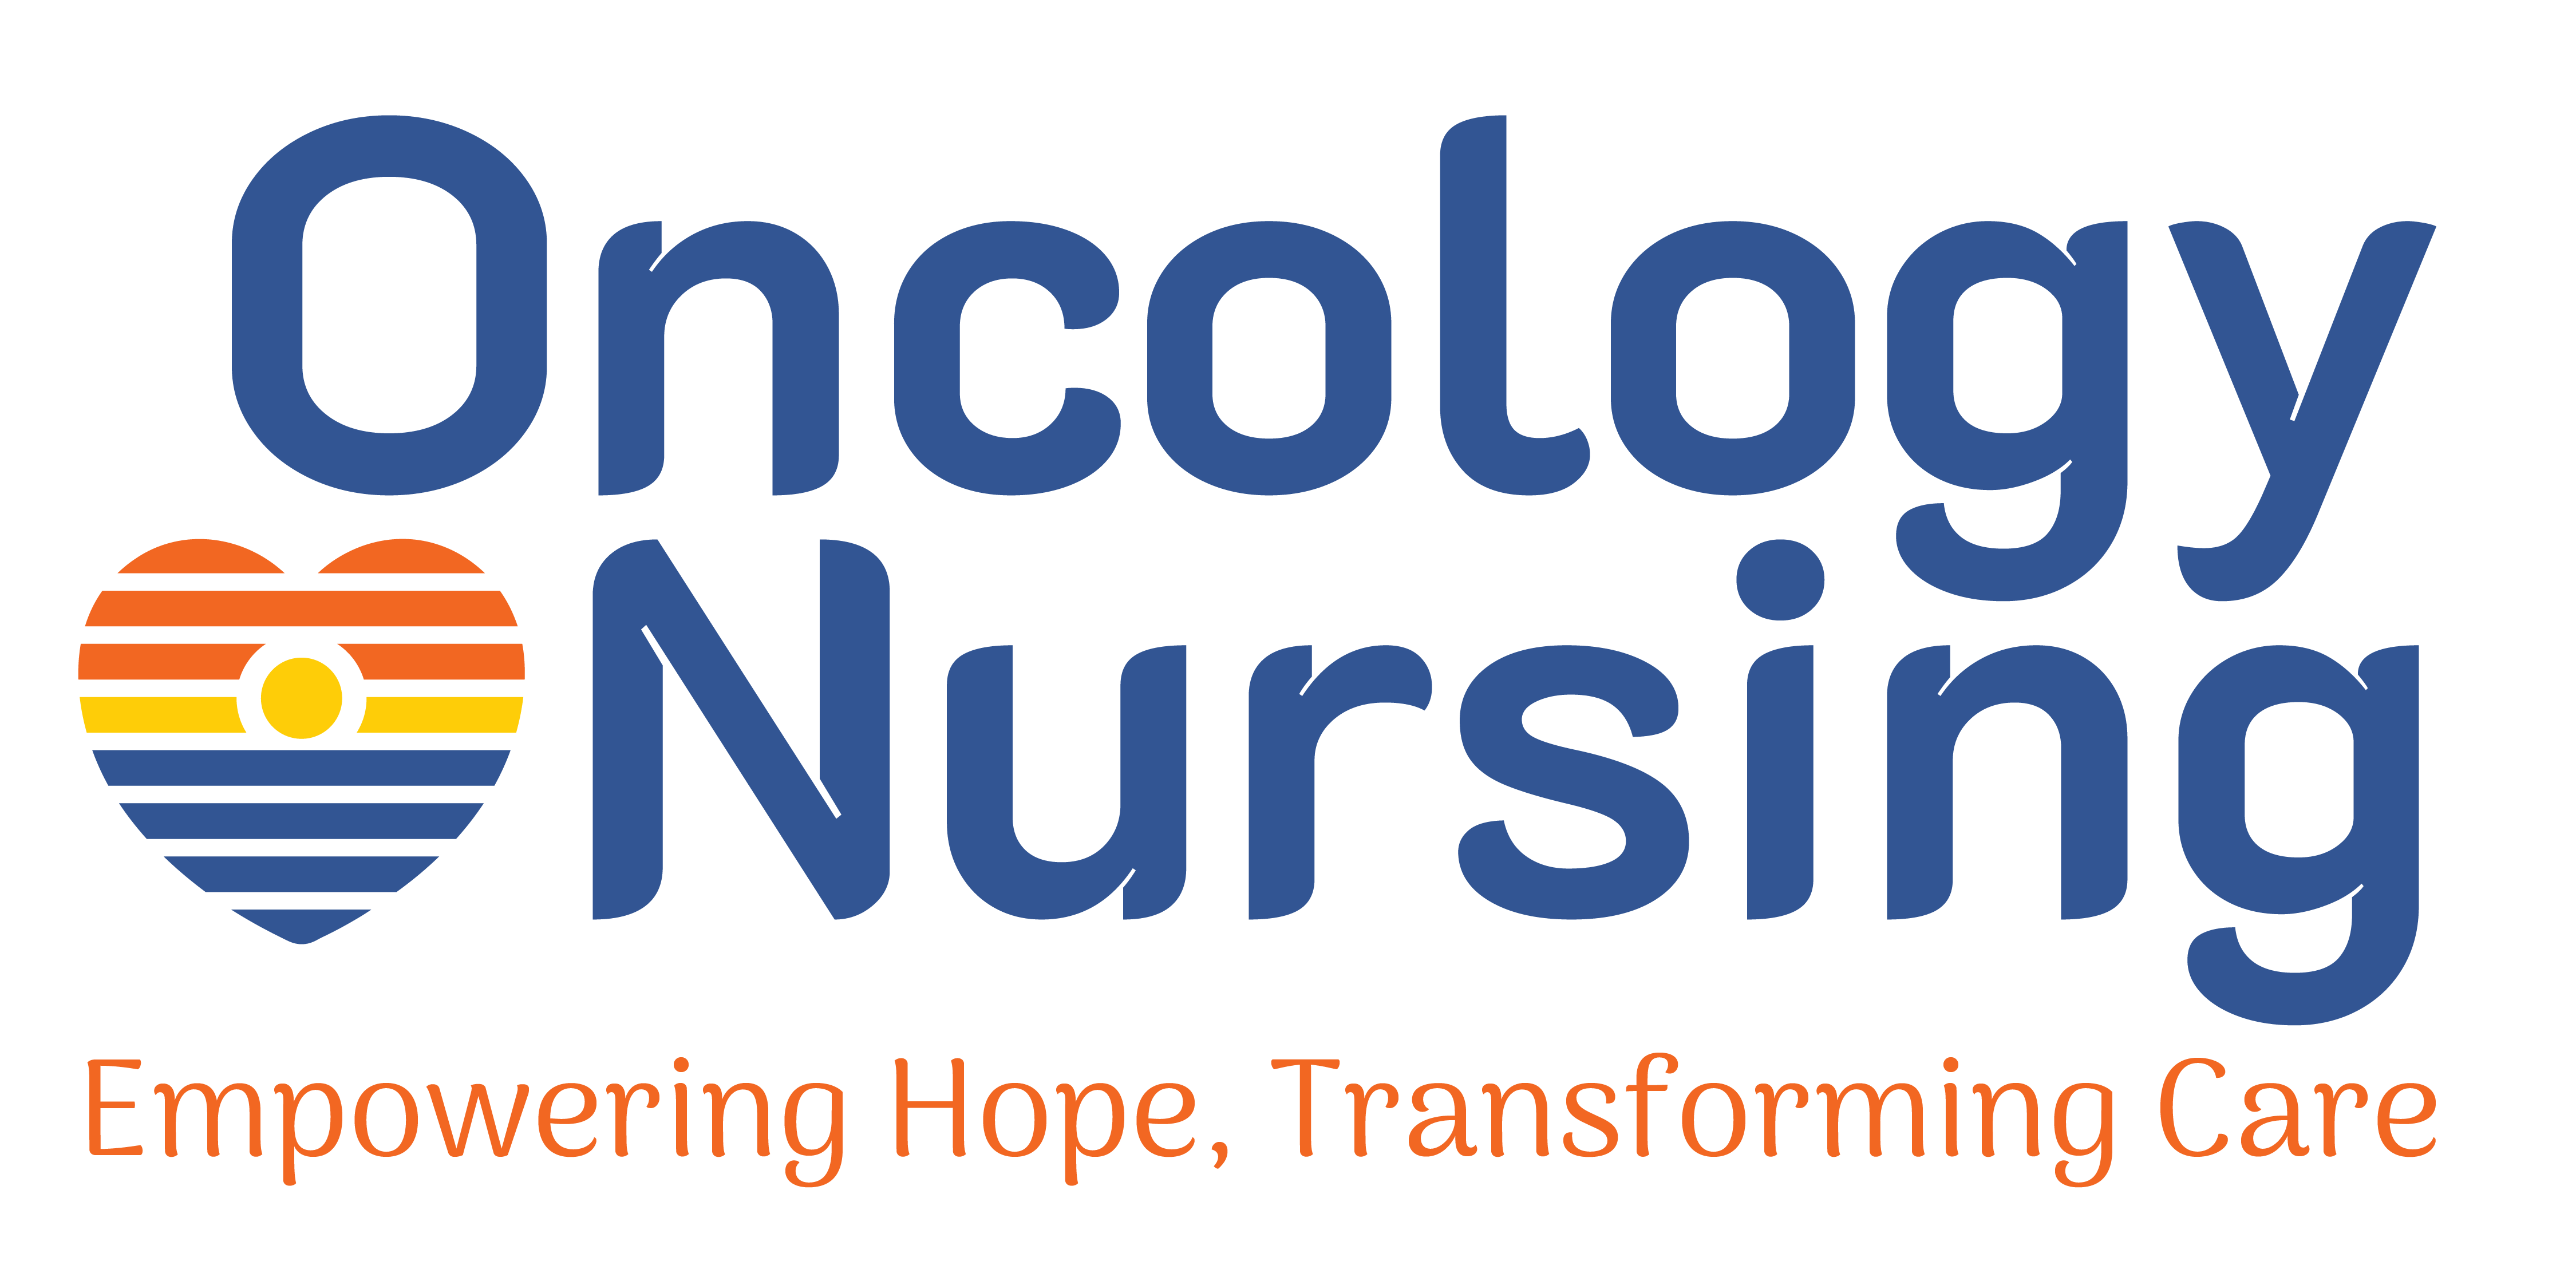 Large blue text, "Oncology Nurses", under that orange purple text "Empowering hope, transforming care". Sunrise heart shaped illustration the the left of the blue text.